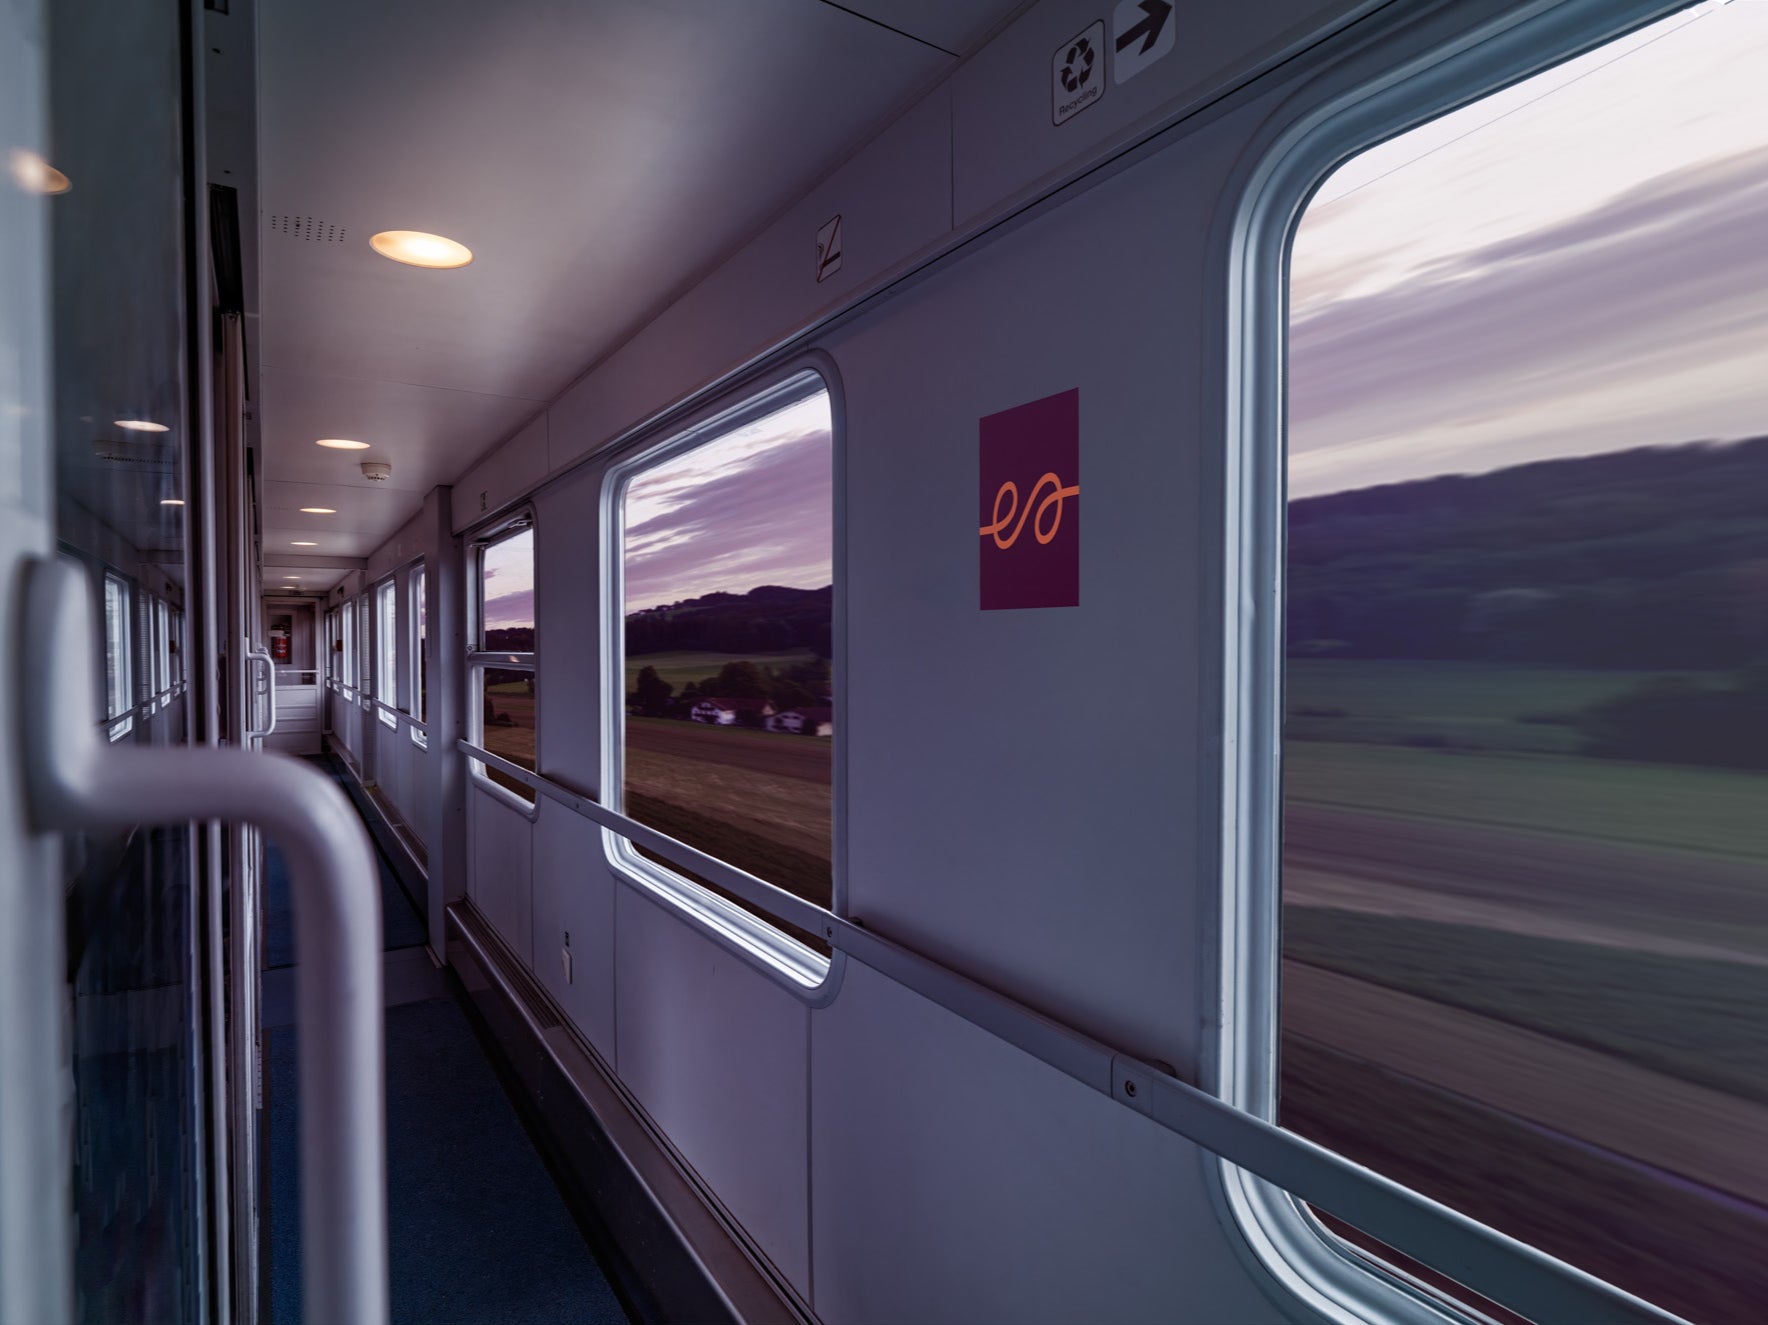 The European Sleeper makes the journey between Brussels and Berlin twice a week